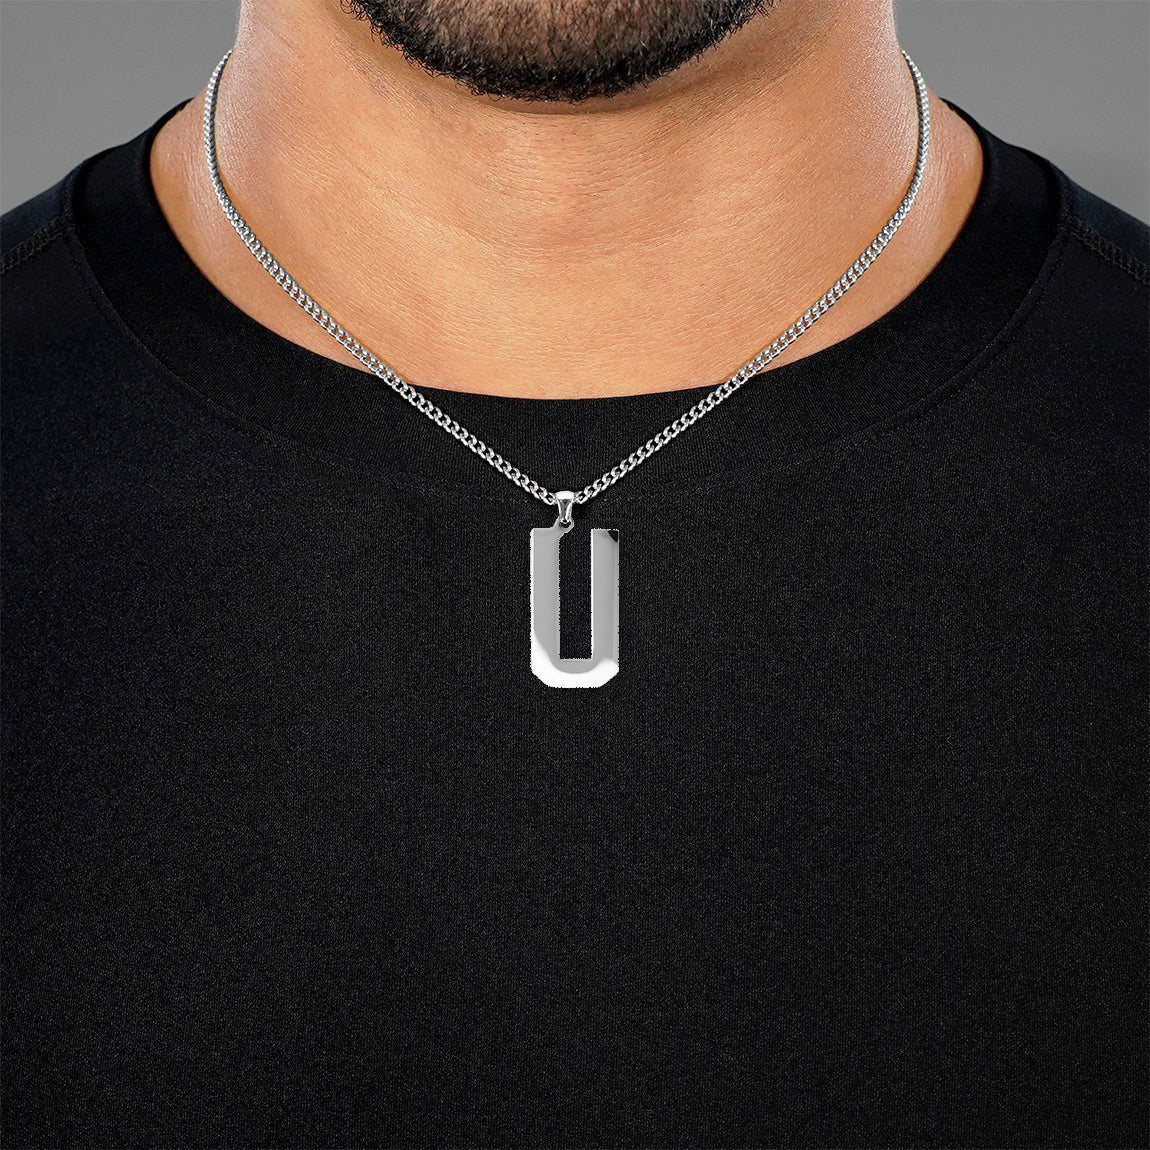 U Letter Pendant with Chain Necklace - Stainless Steel